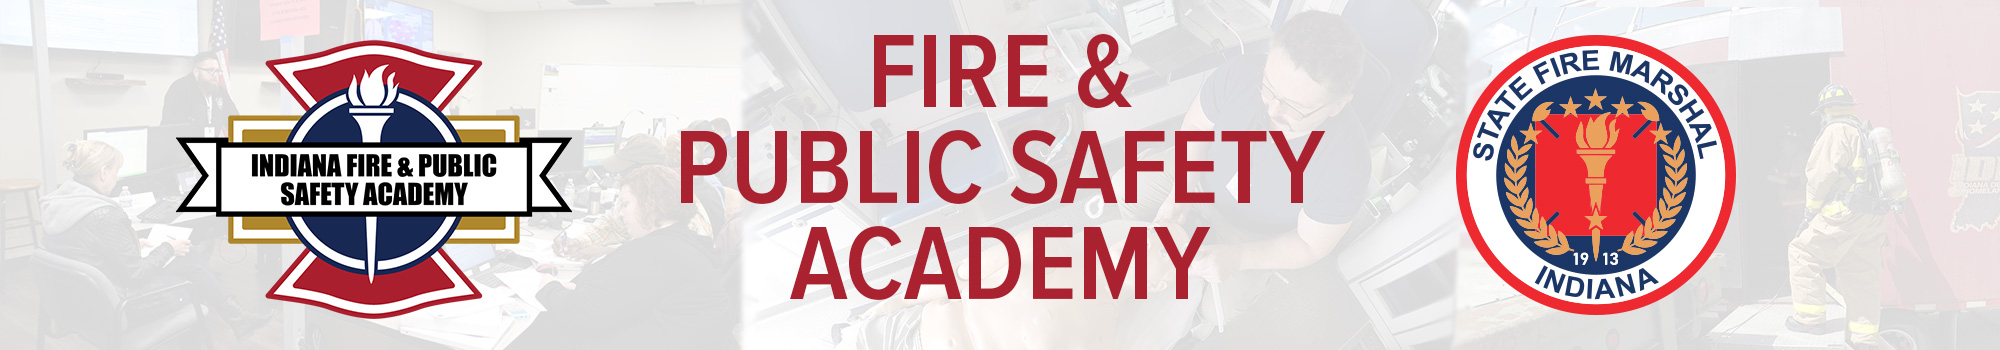 Academy, State Fire Marshal logos with Training title